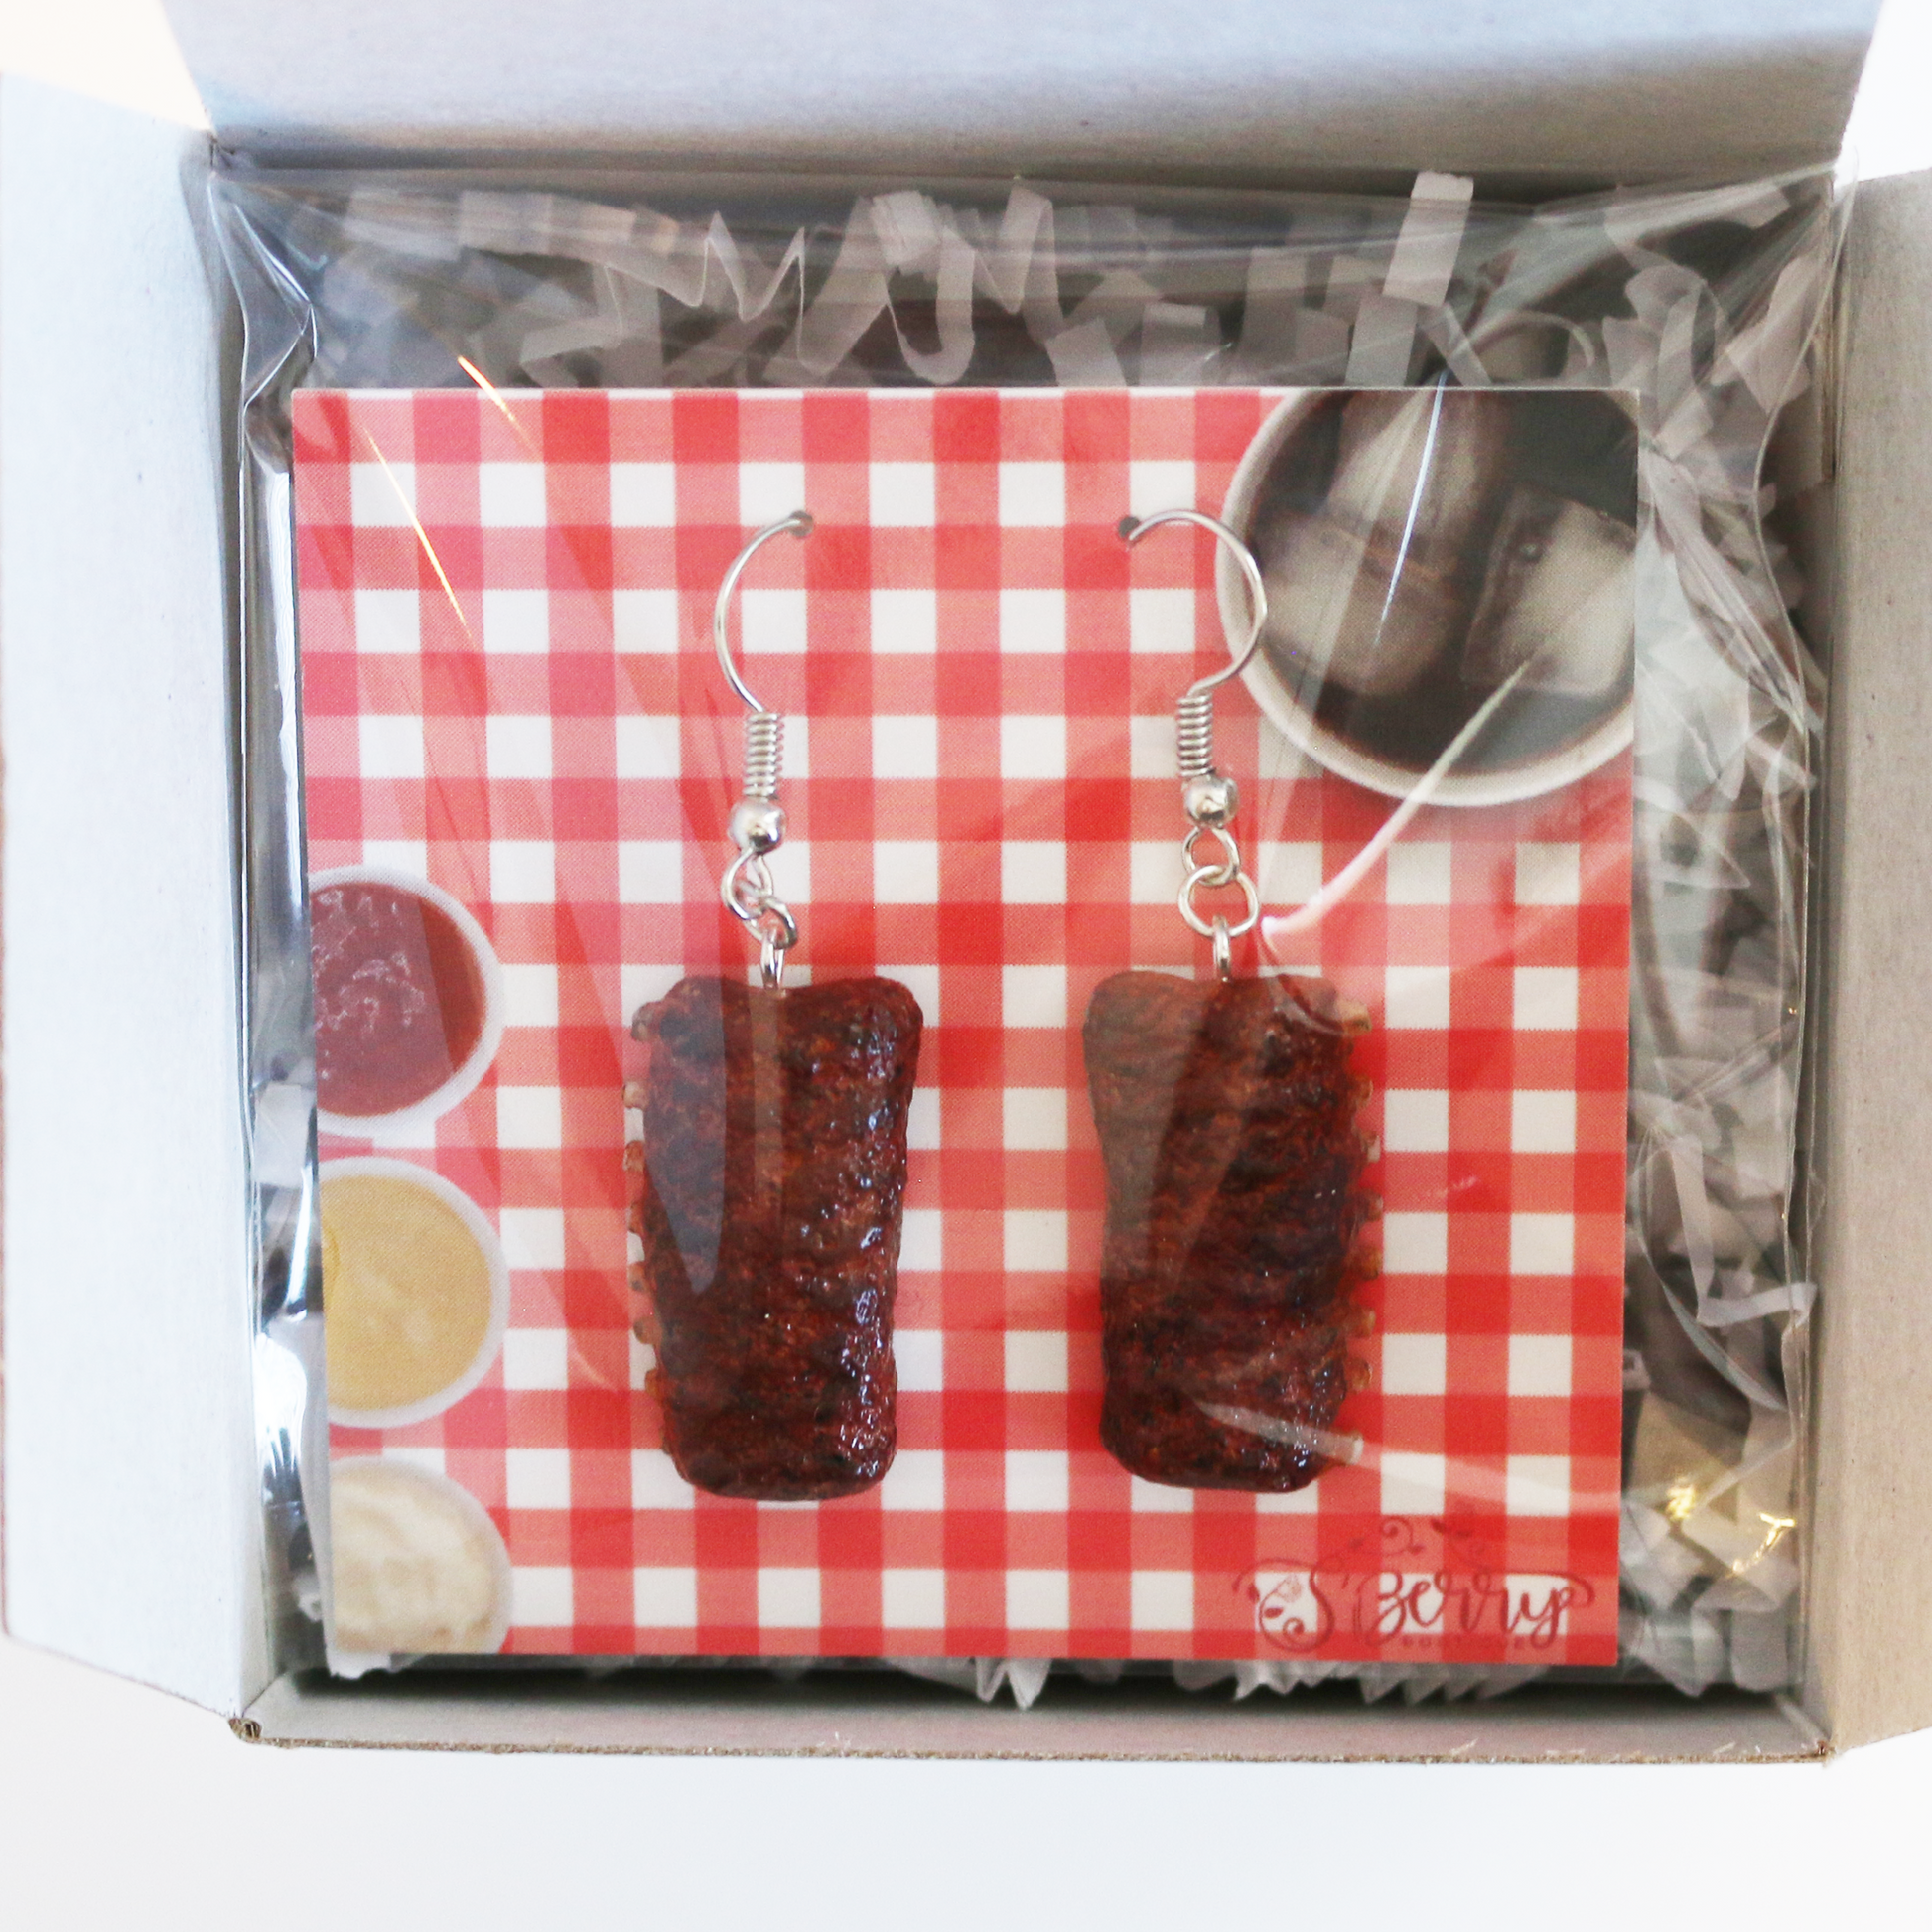 Rack of Ribs Earrings | Miniature Food Jewelry | For Any BBQ, Grill, or Smoke Enthusiast | S'Berry Boutique